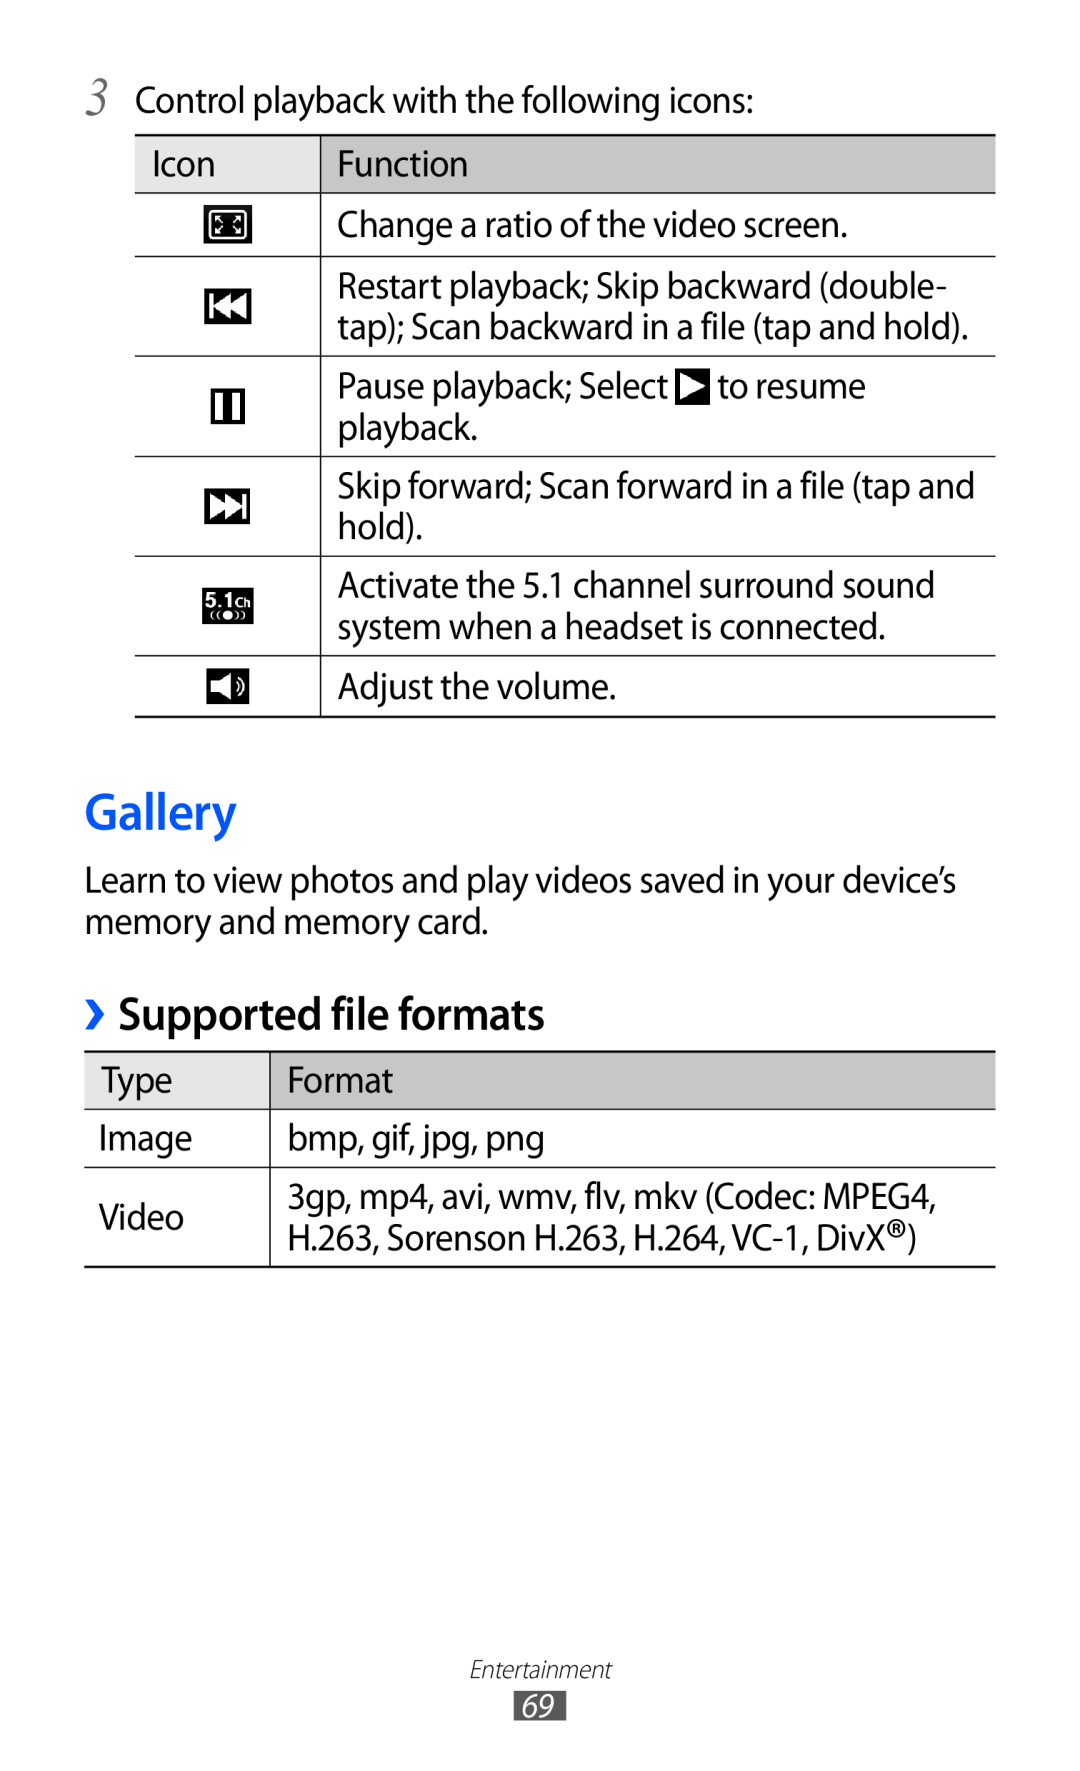 Samsung GT-I9070 user manual Gallery, Supported file formats 